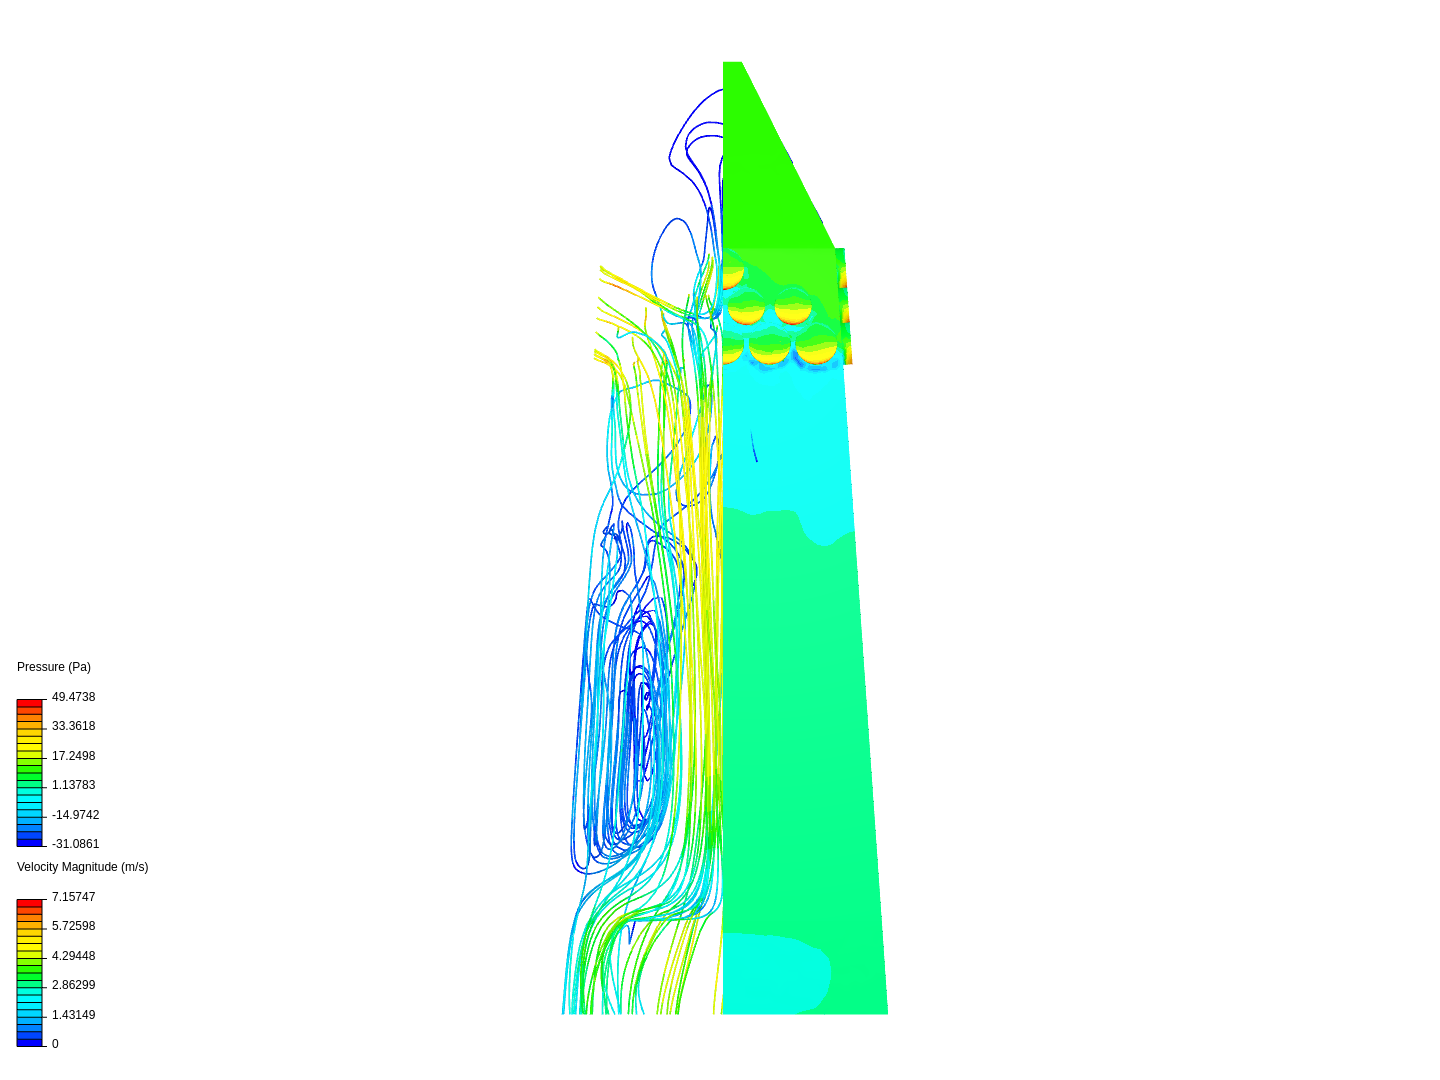 Tower flow image